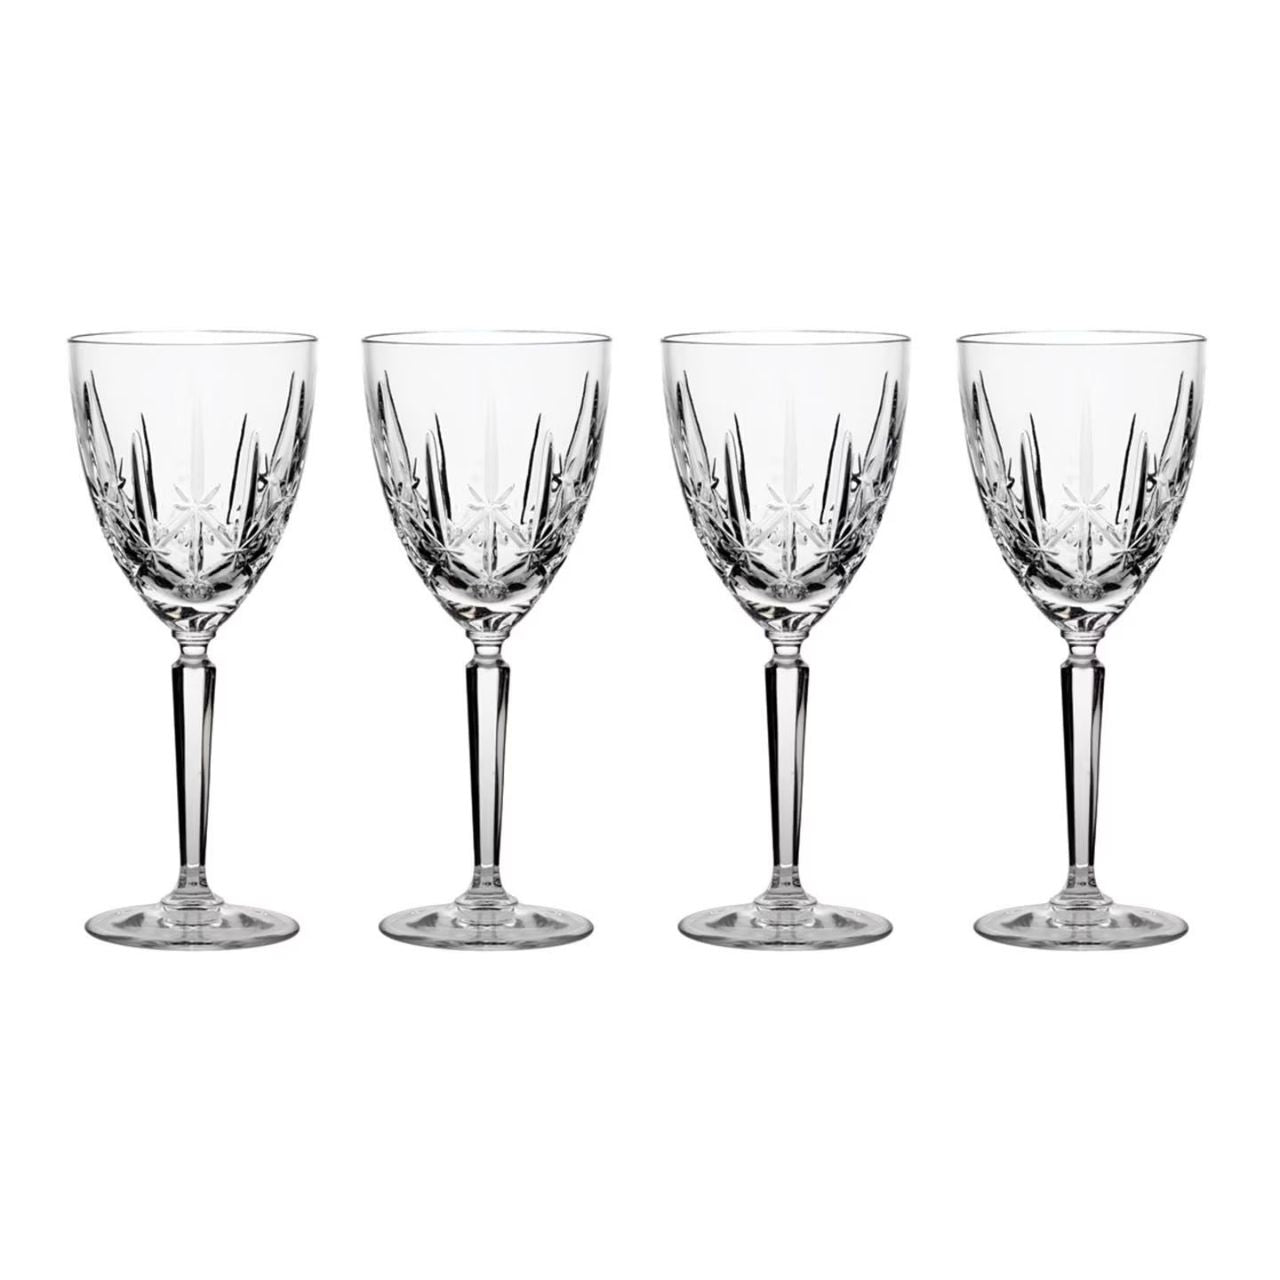 Marquis Sparkle Oversized Goblet Set of 4 by Waterford  Brisk and modern, the Sparkle pattern by Waterford is characterized by brilliant crystal cuts reminiscent of delicate starlight. Although versatile enough to use as a formal water glass, these oversized Goblets are truly at their best when used to serve full-bodied red wines like Burgundy and Bordeaux.